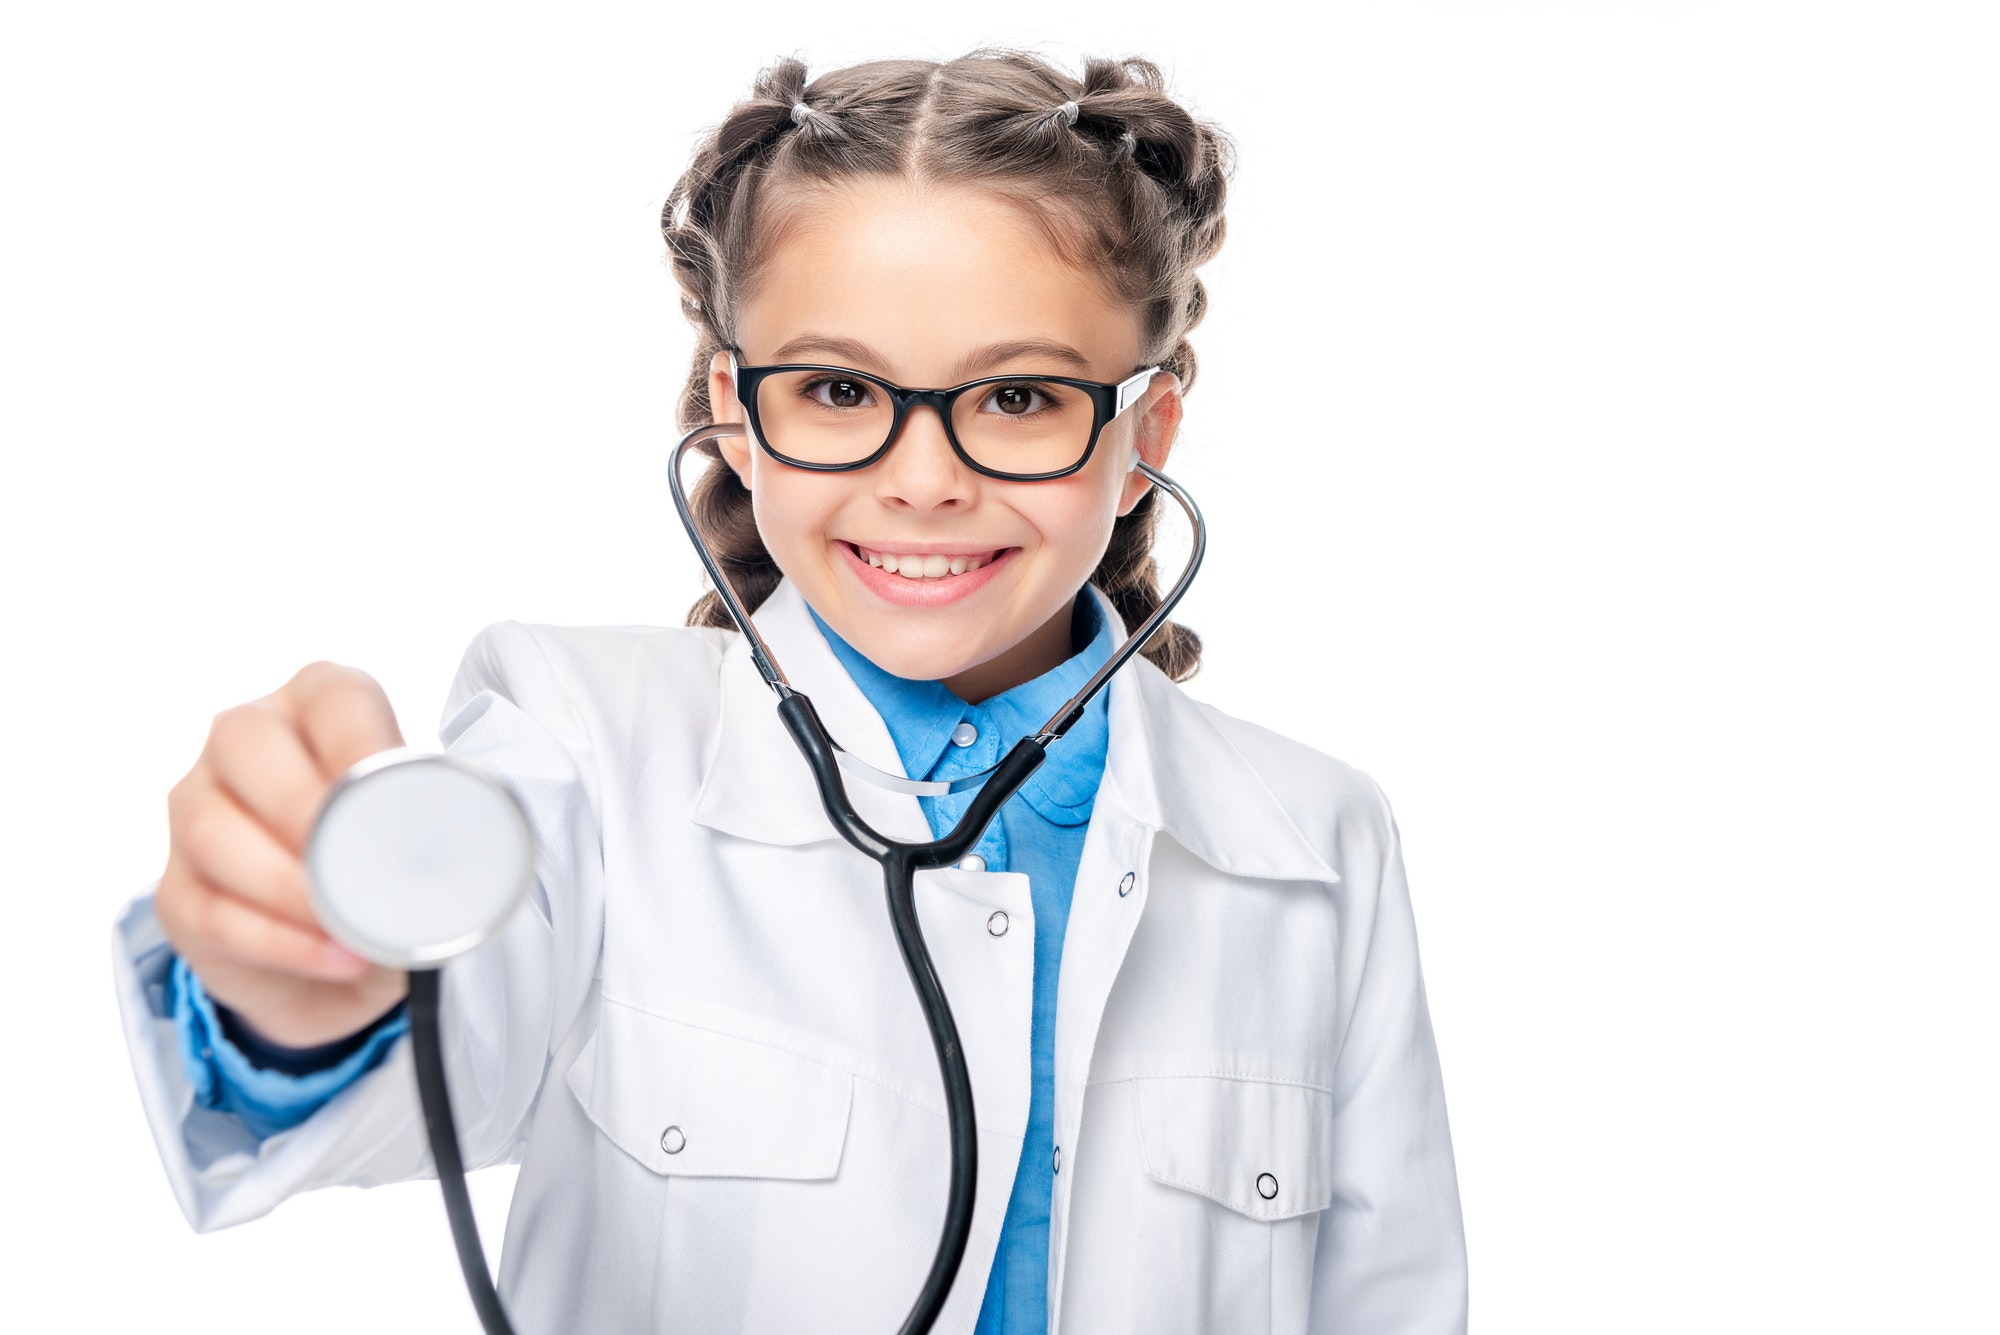 schoolchild in costume of doctor examining with stethoscope isolated on white